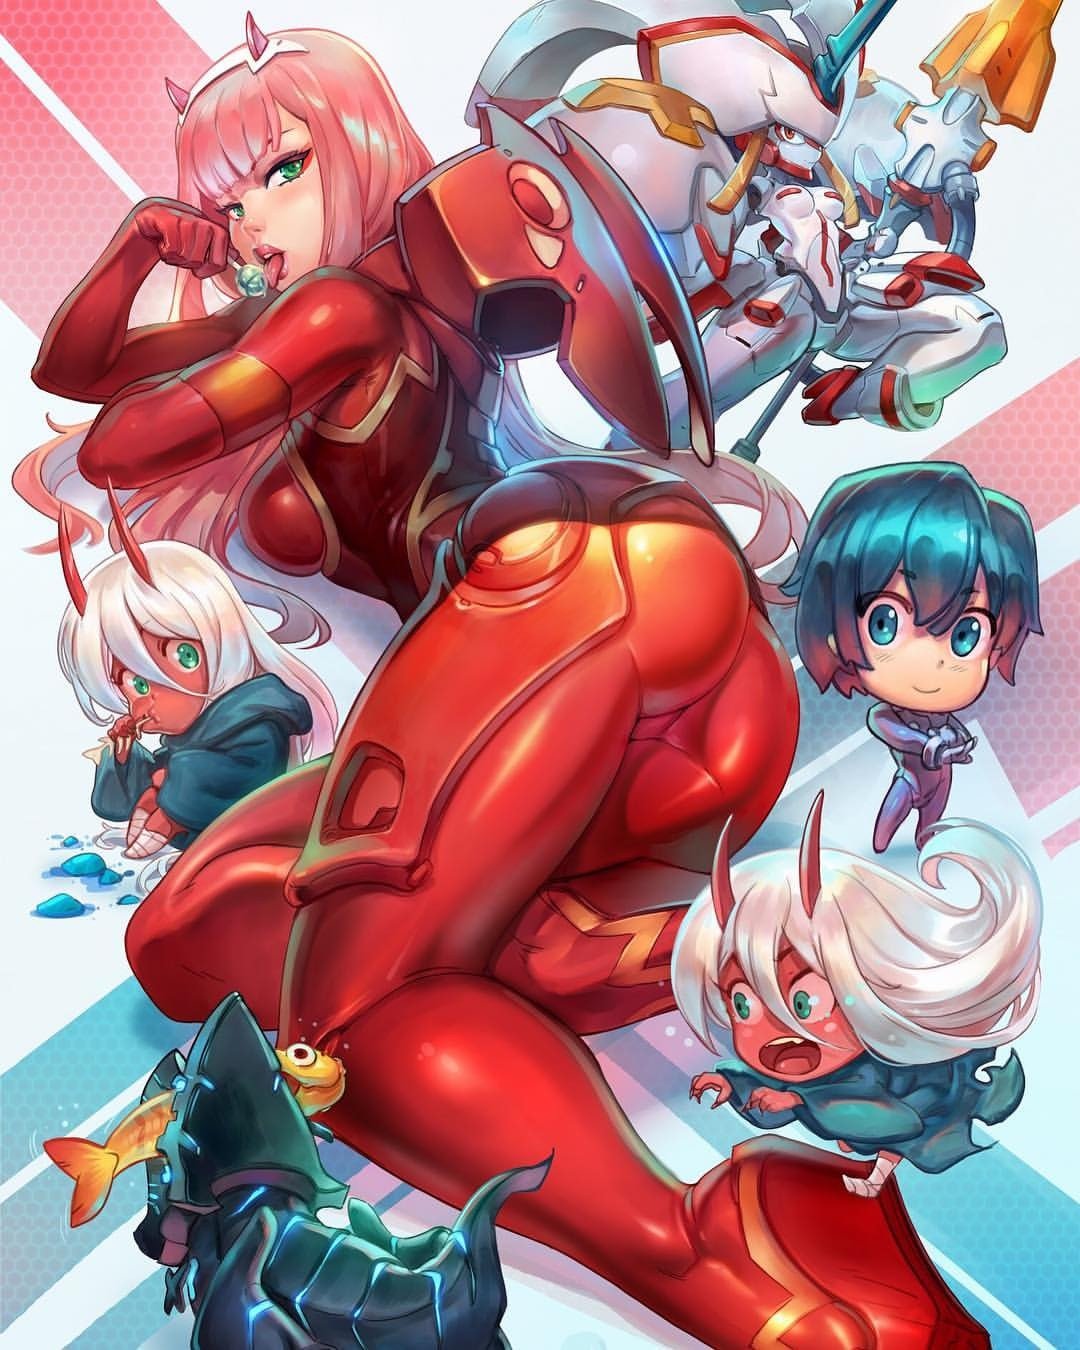 Photo by Justanotherguy with the username @Justanotherguy79,  October 16, 2018 at 3:02 AM and the text says 'reiquintero:

ZERO TWO Darling in the Franxx!  REIQ VER. Playful and Laborious artwork, I needed an excuse to draw Chibis and Booty within a storytelling context. Hope you like it! Patreon Reward Coloring Process Video! #reiq #digital #art #process..'